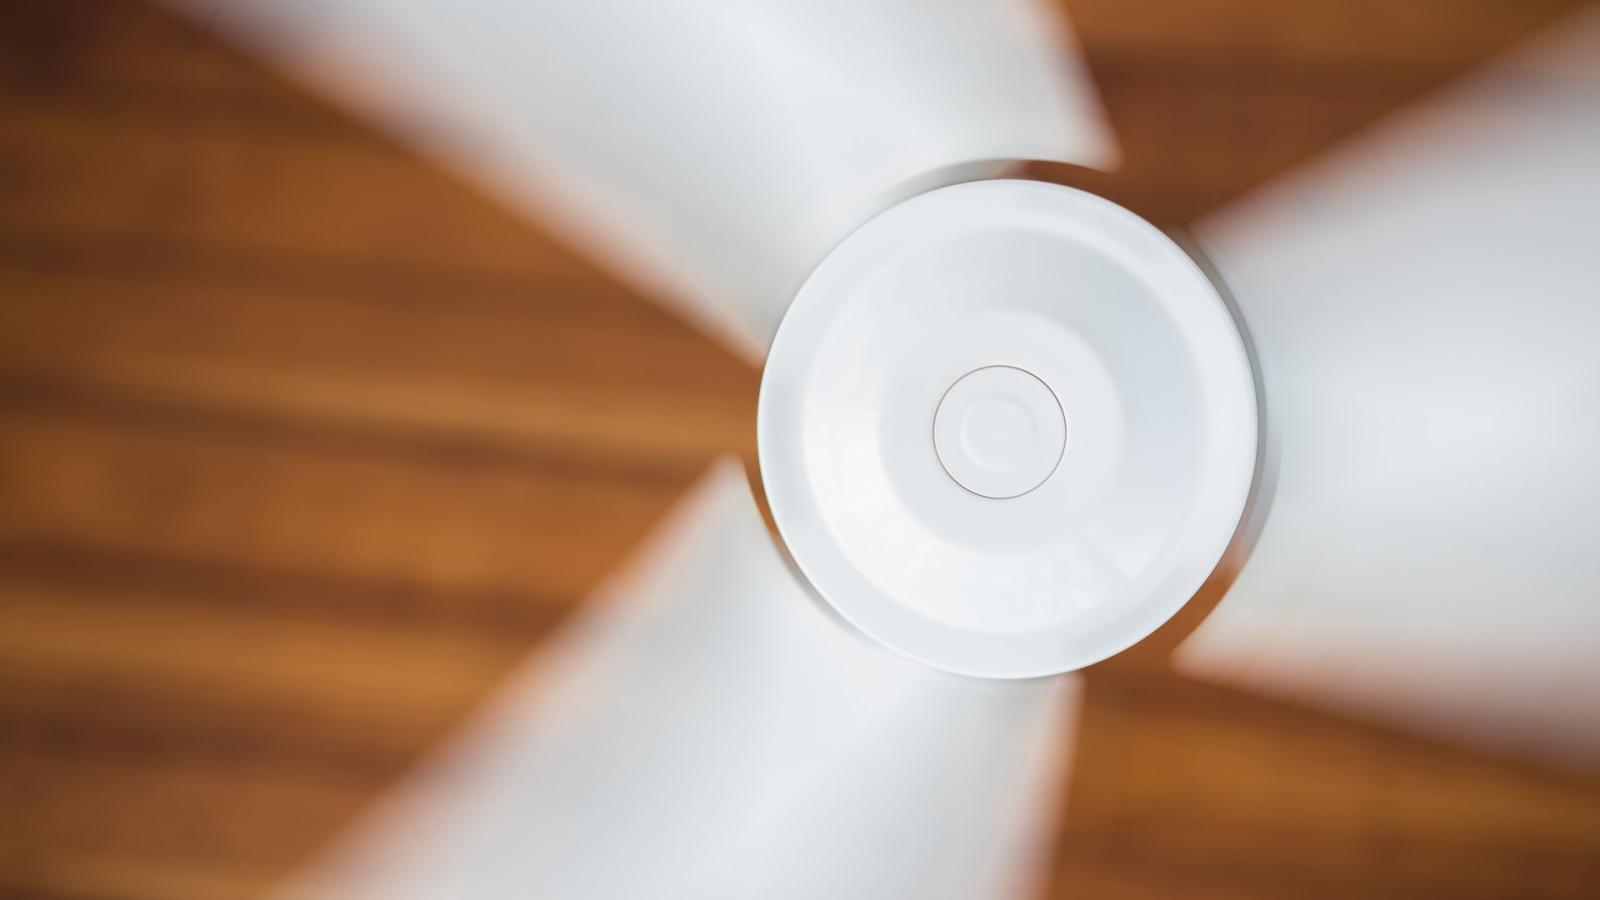 White fan spins quickly against a wood background.